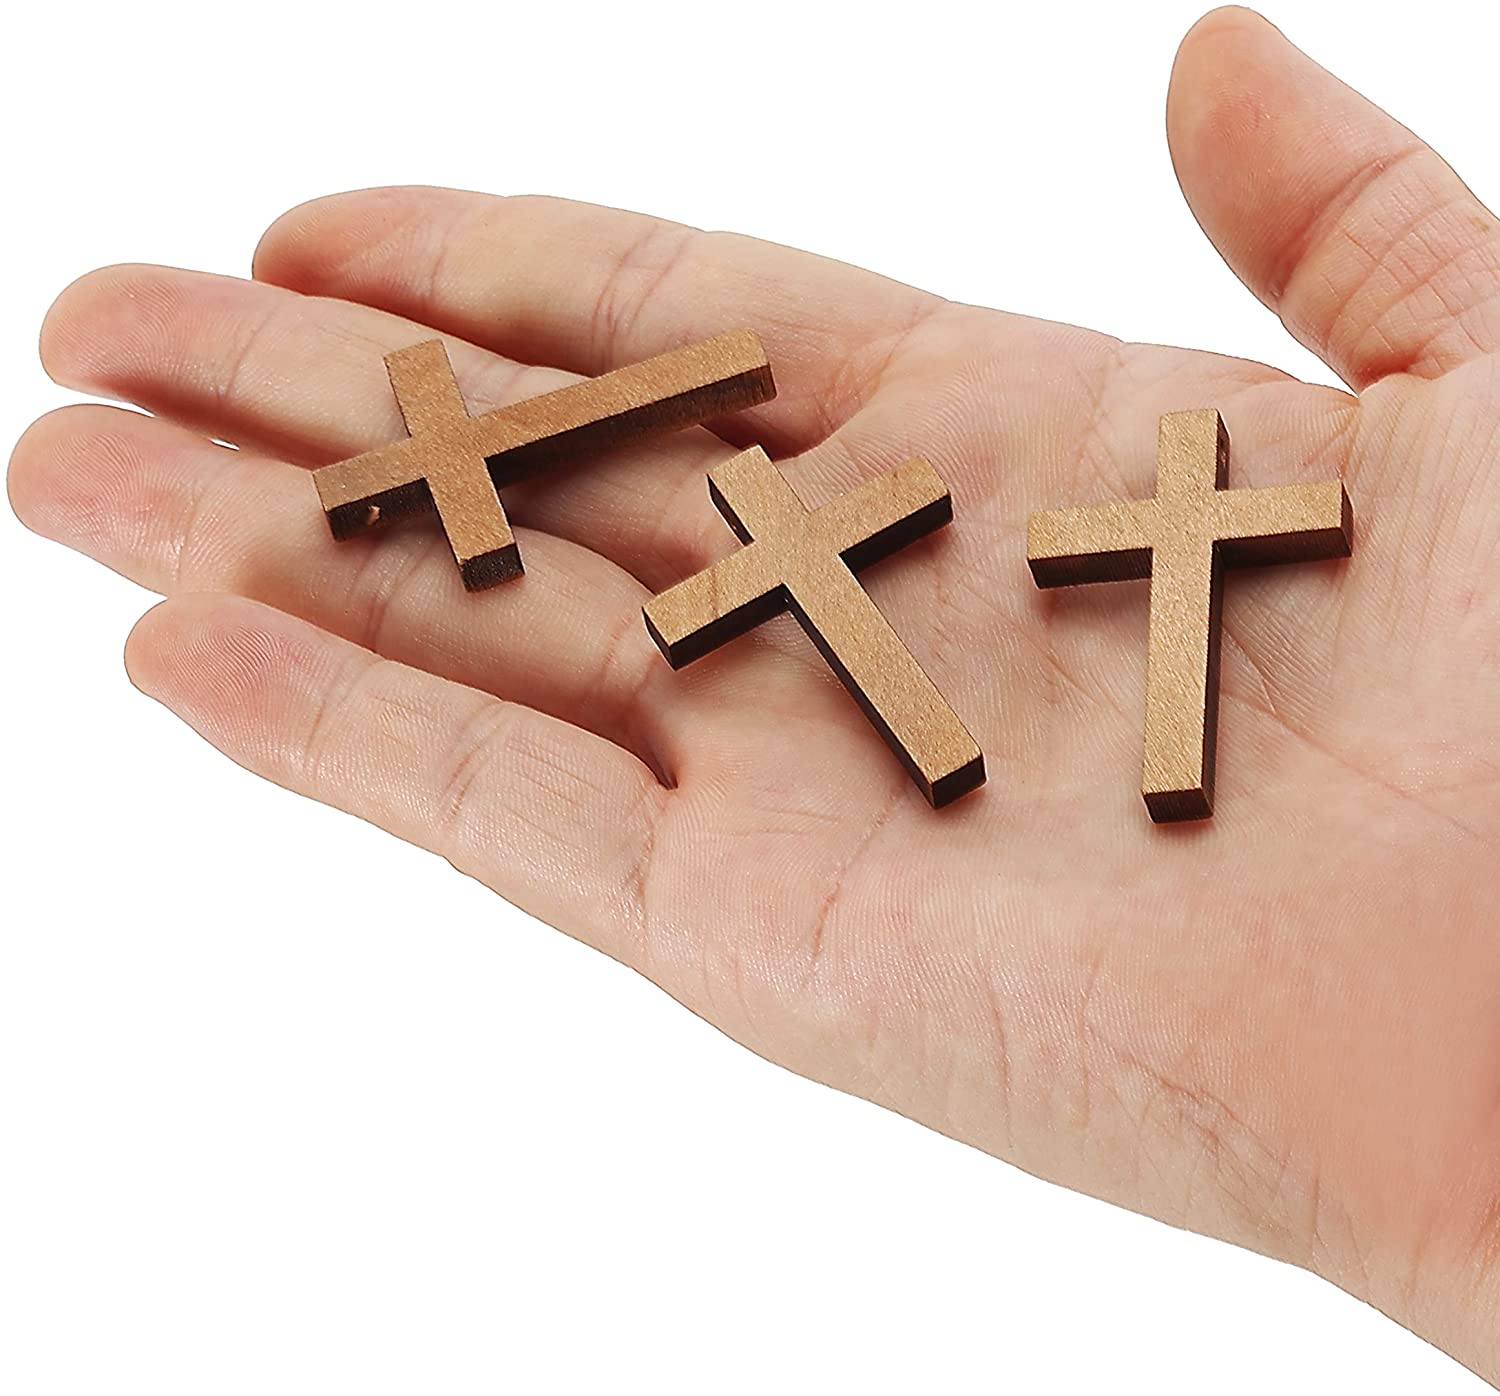 Mr. Pen- Wooden Crosses, 1.2 x 1.75 Inches, 50 Pack, Small Wooden